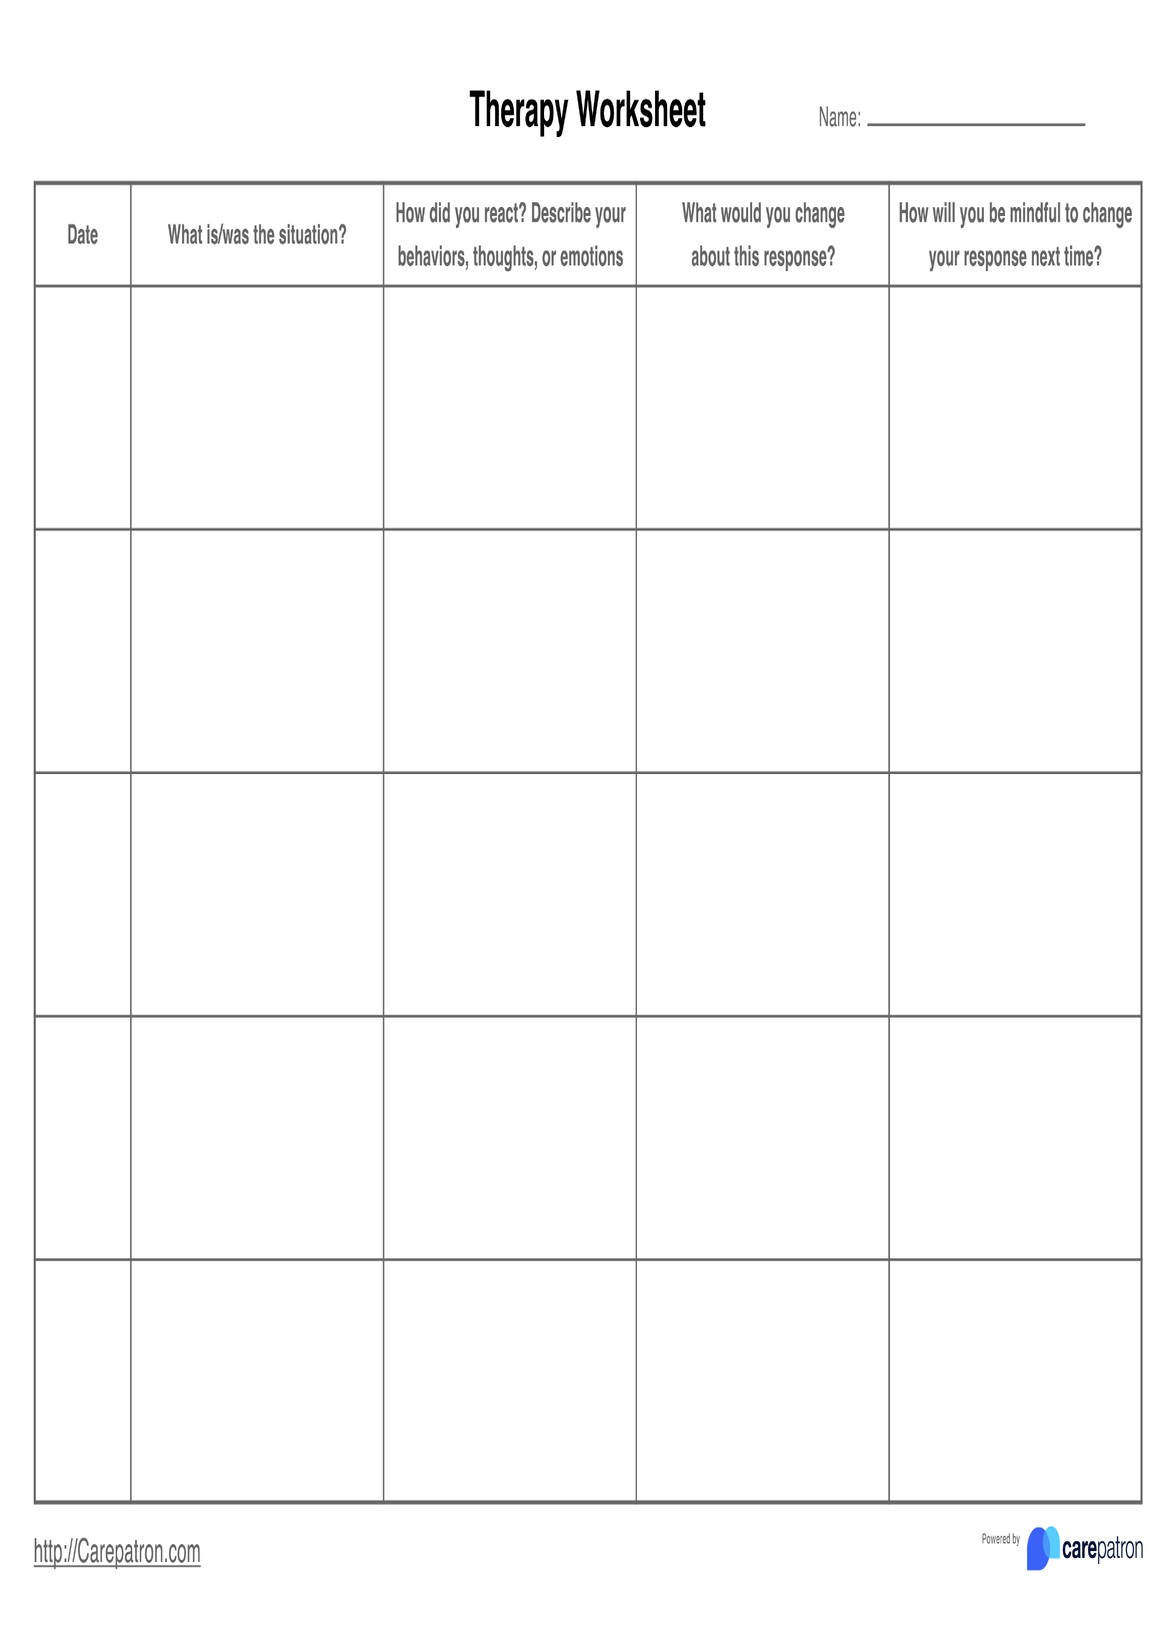 Therapy Worksheet PDF Example